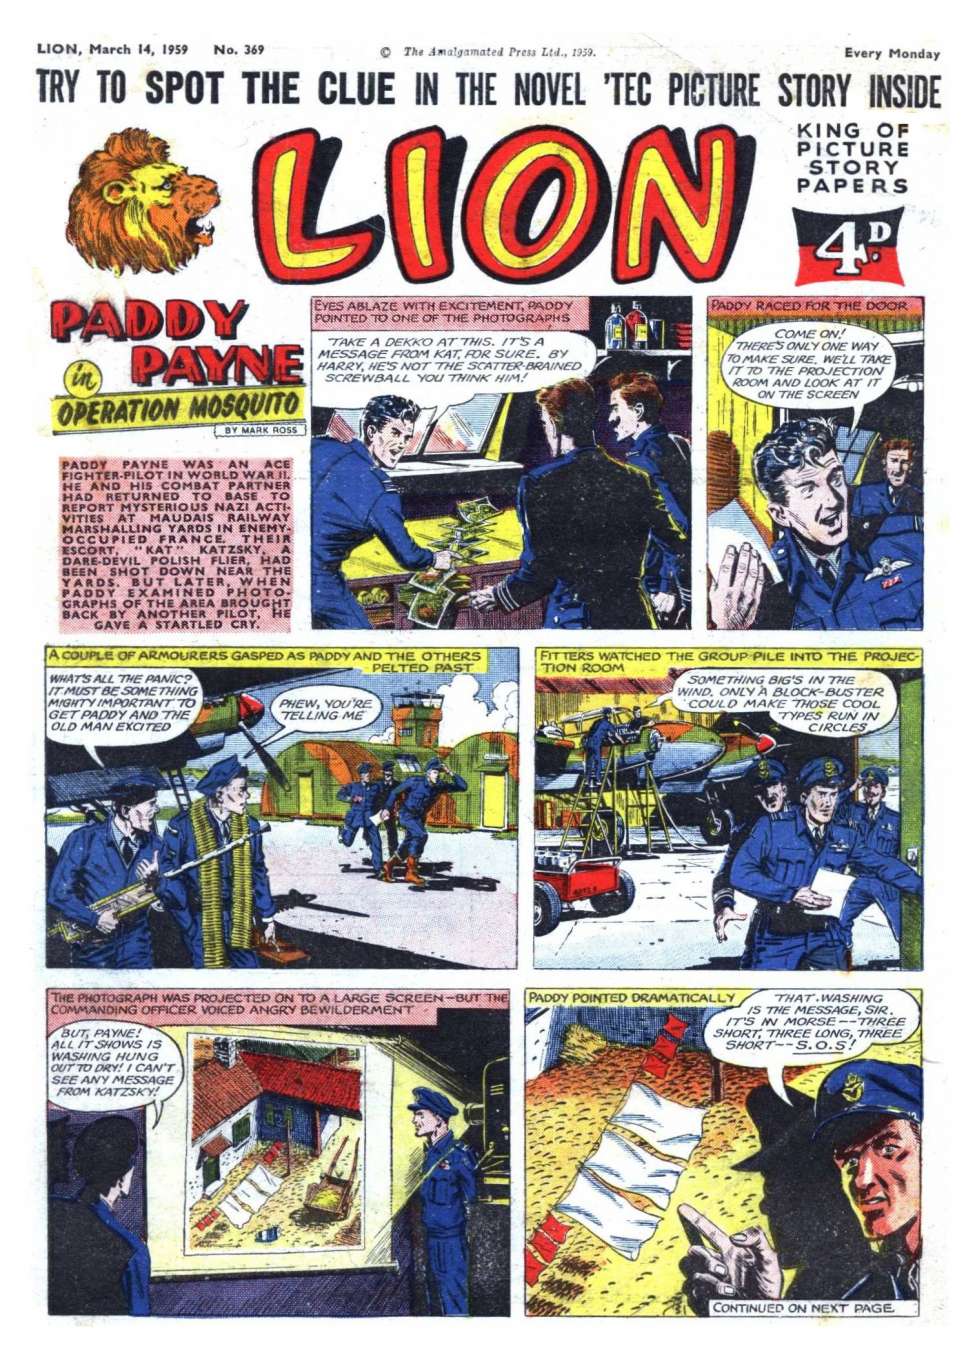 Book Cover For Lion 369